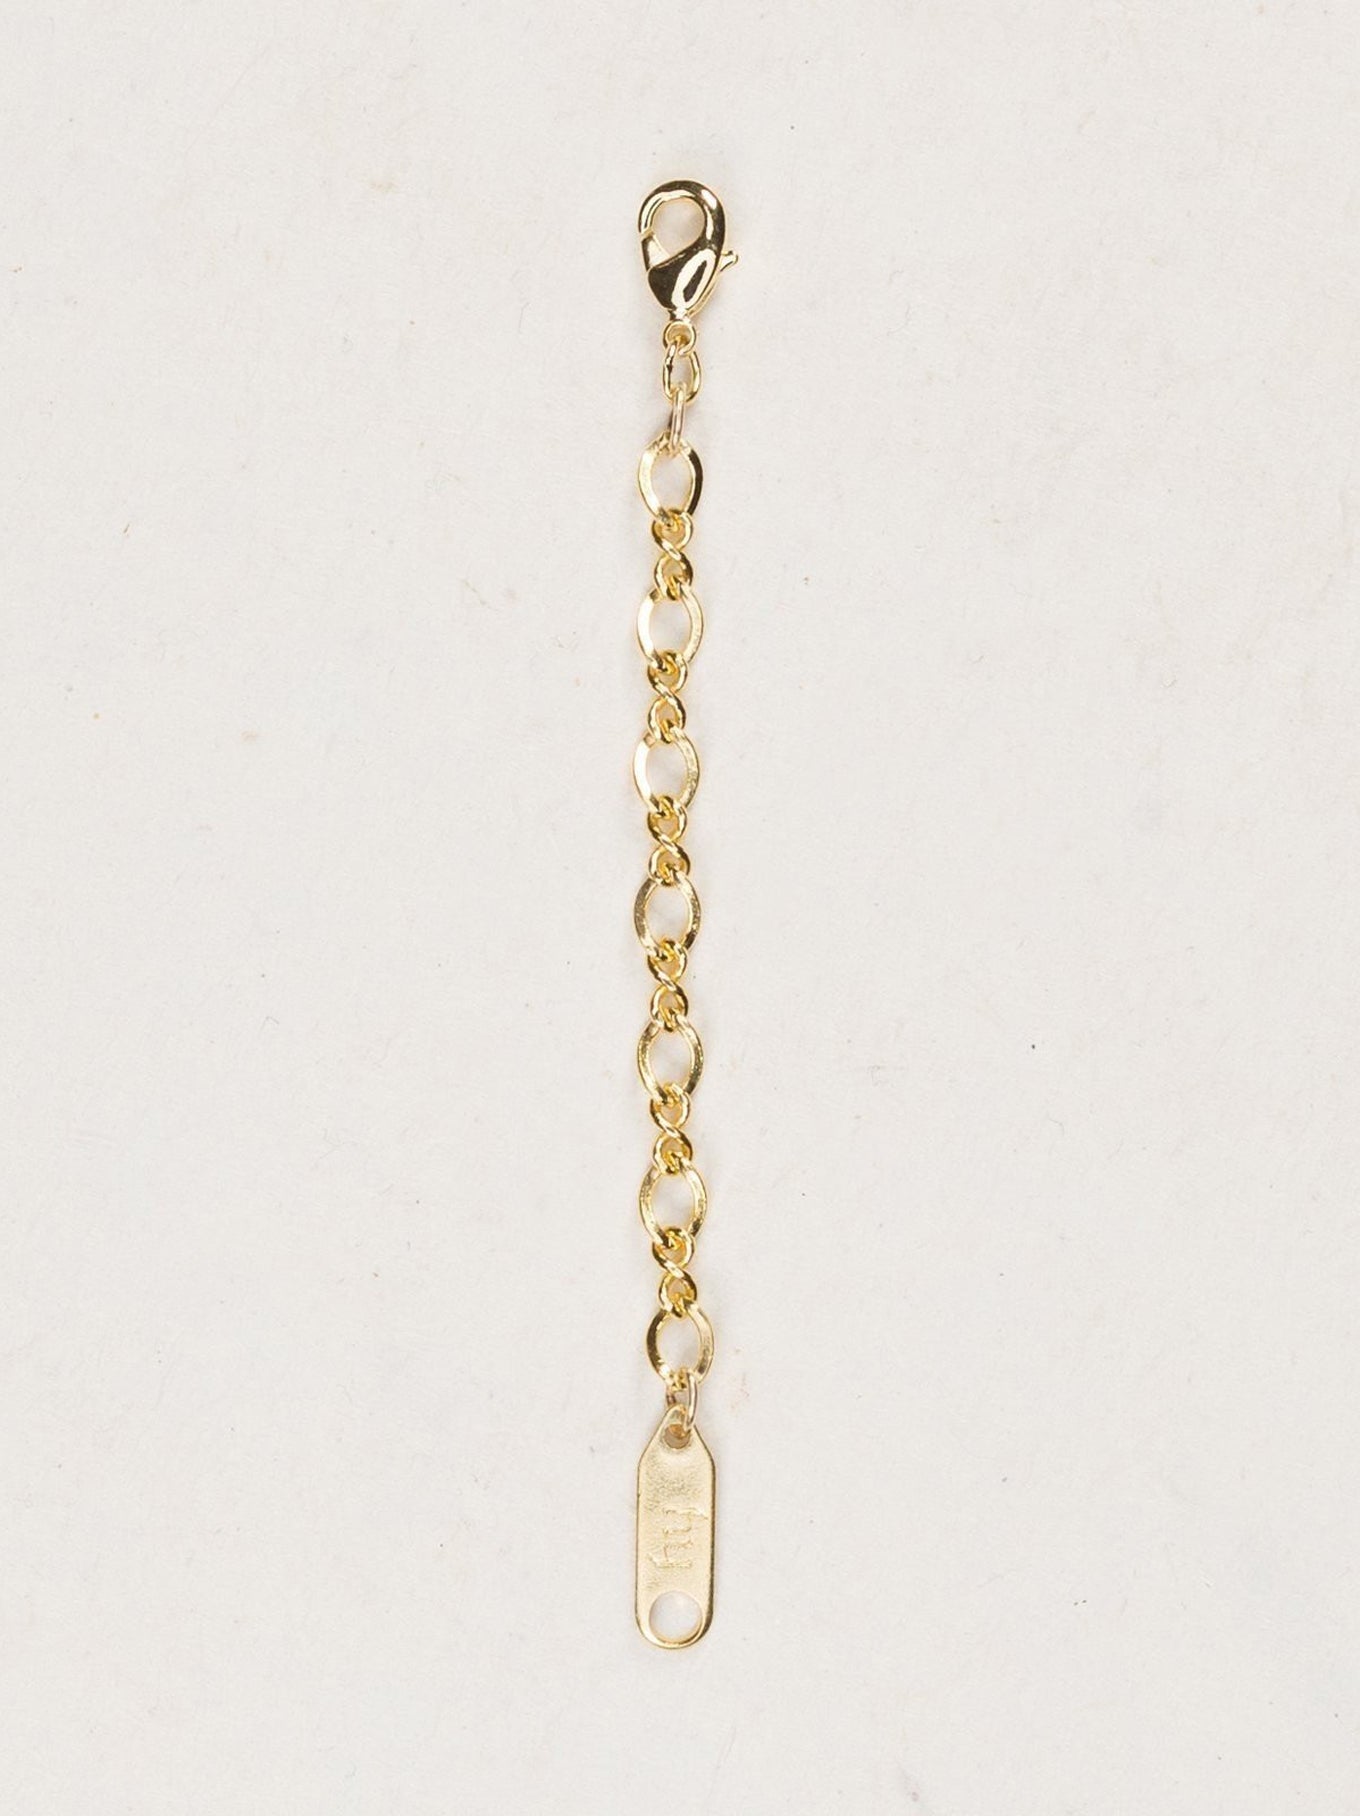  Gold Necklace Extenders 14k Gold Plated Extender Chain